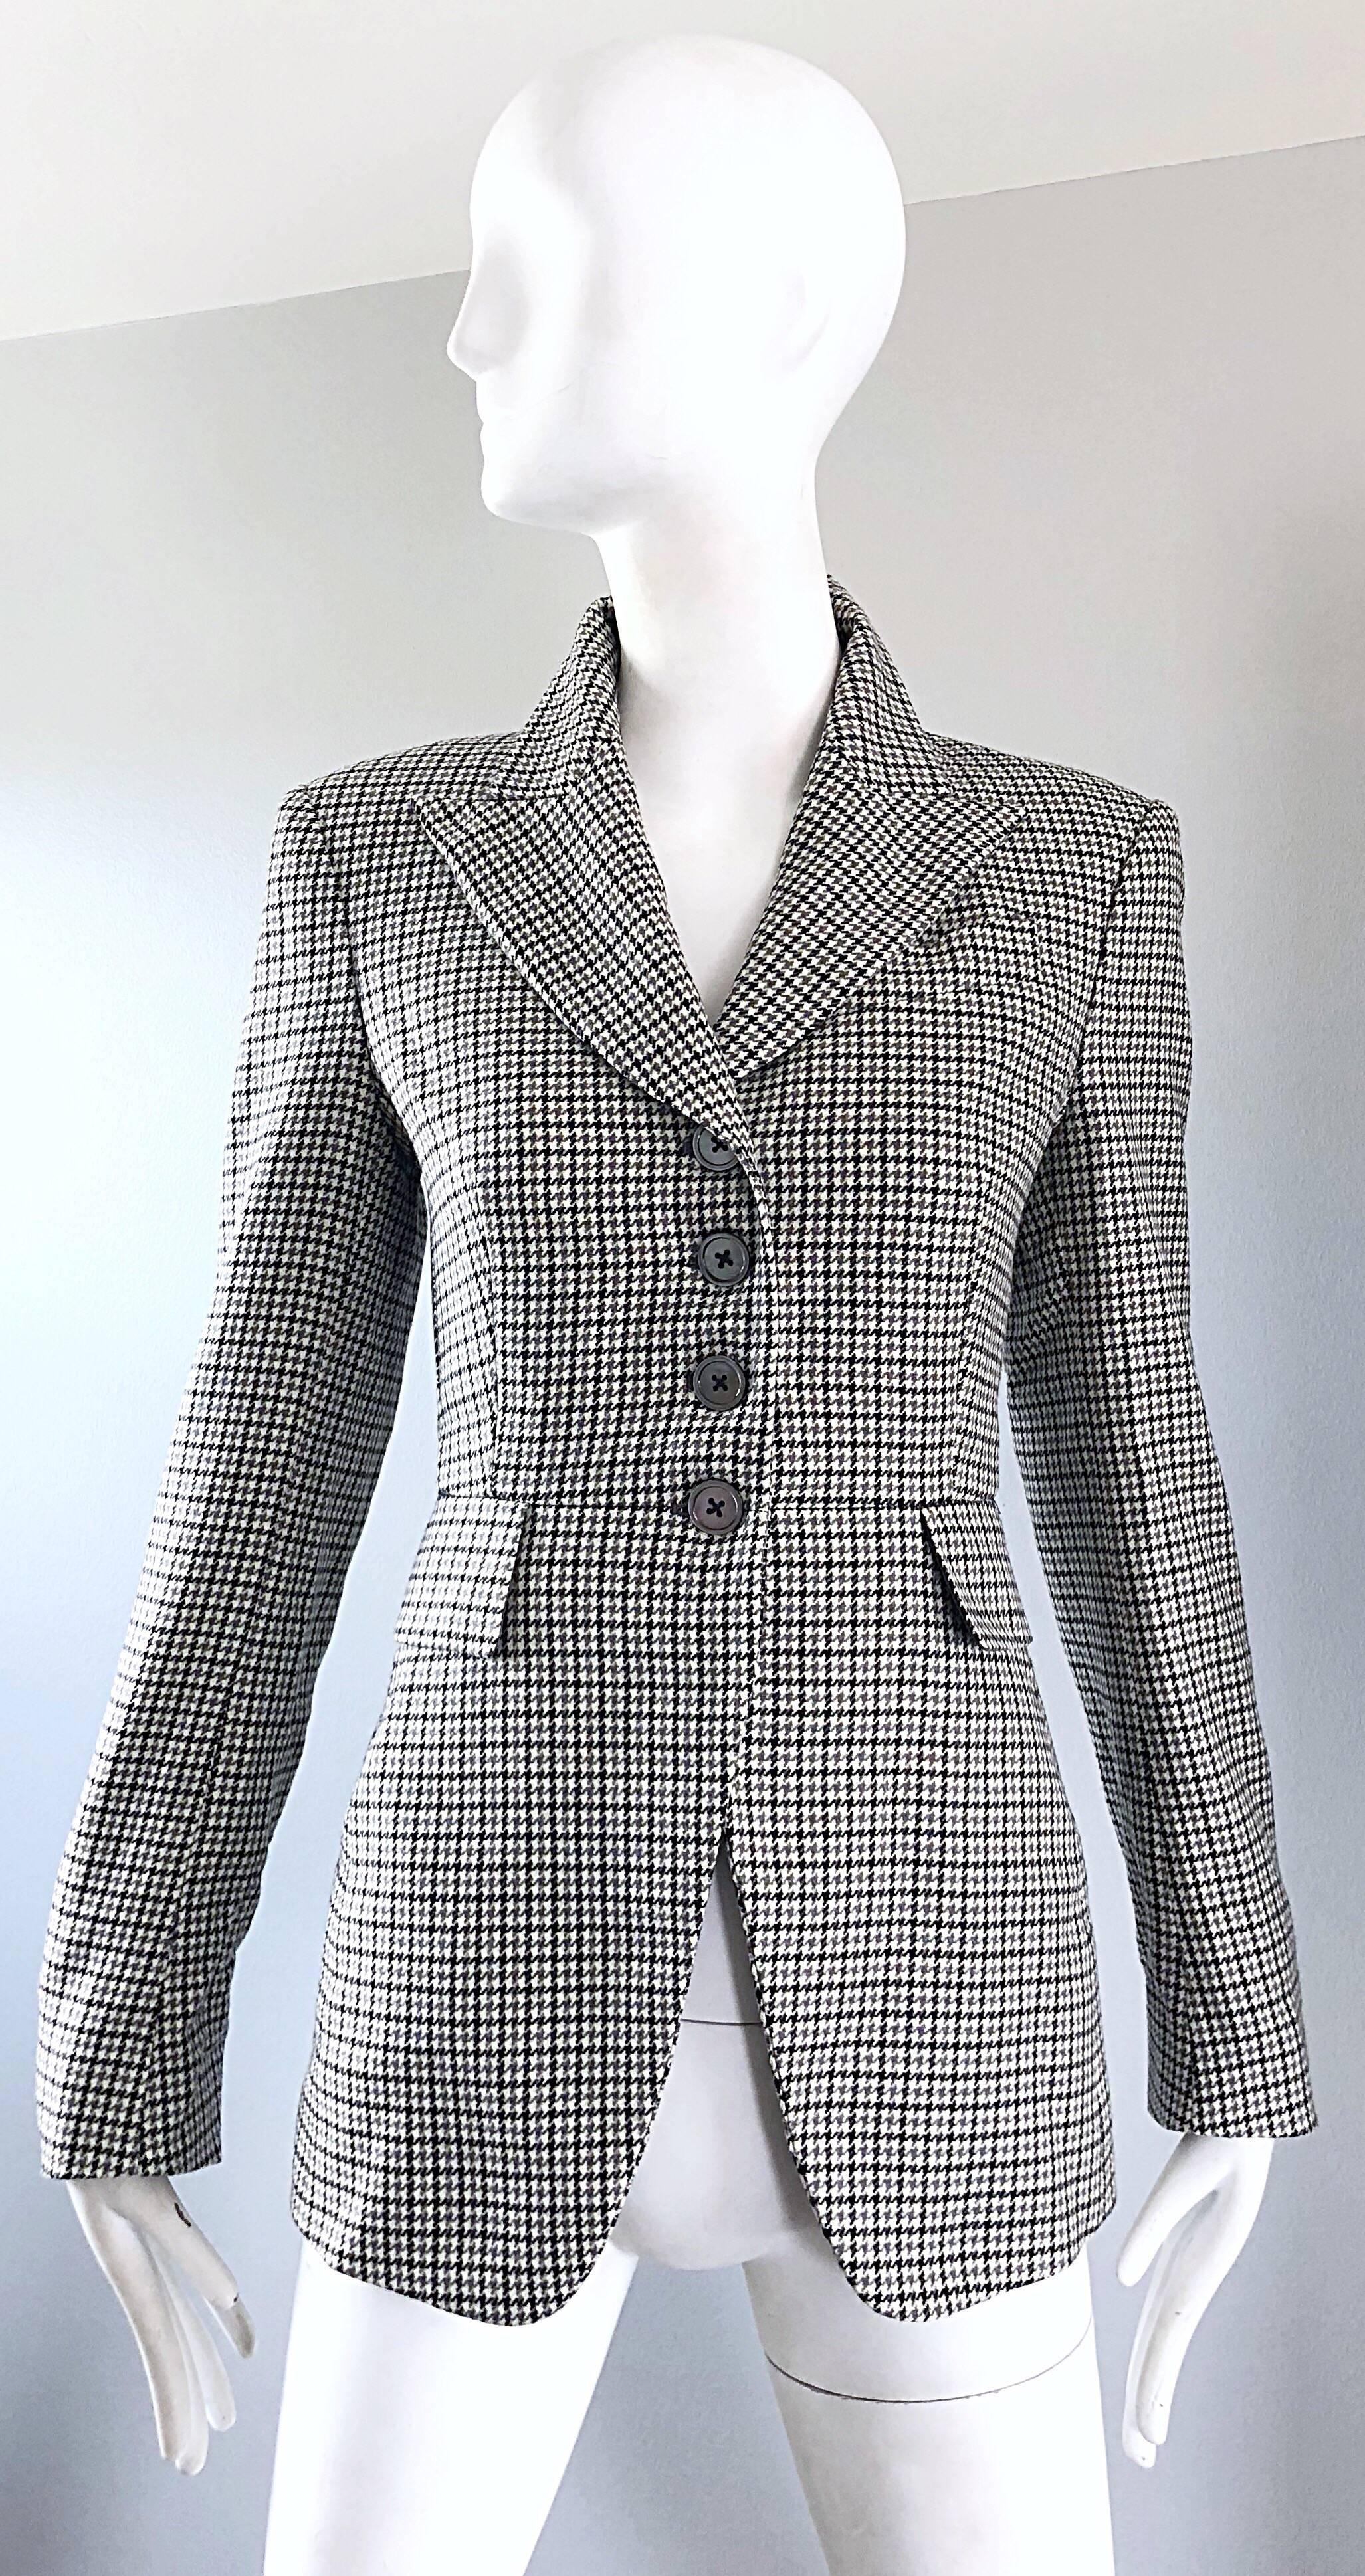 Chic vintage late 90s MICHAEL KORS COLLECTION gray and black houndstooth blazer jacket! Features a nice tailored fit, with a stylish, yet subdued grey, black and white mini houndstooth print. Pockets at each side of the waist. Extremely soft and